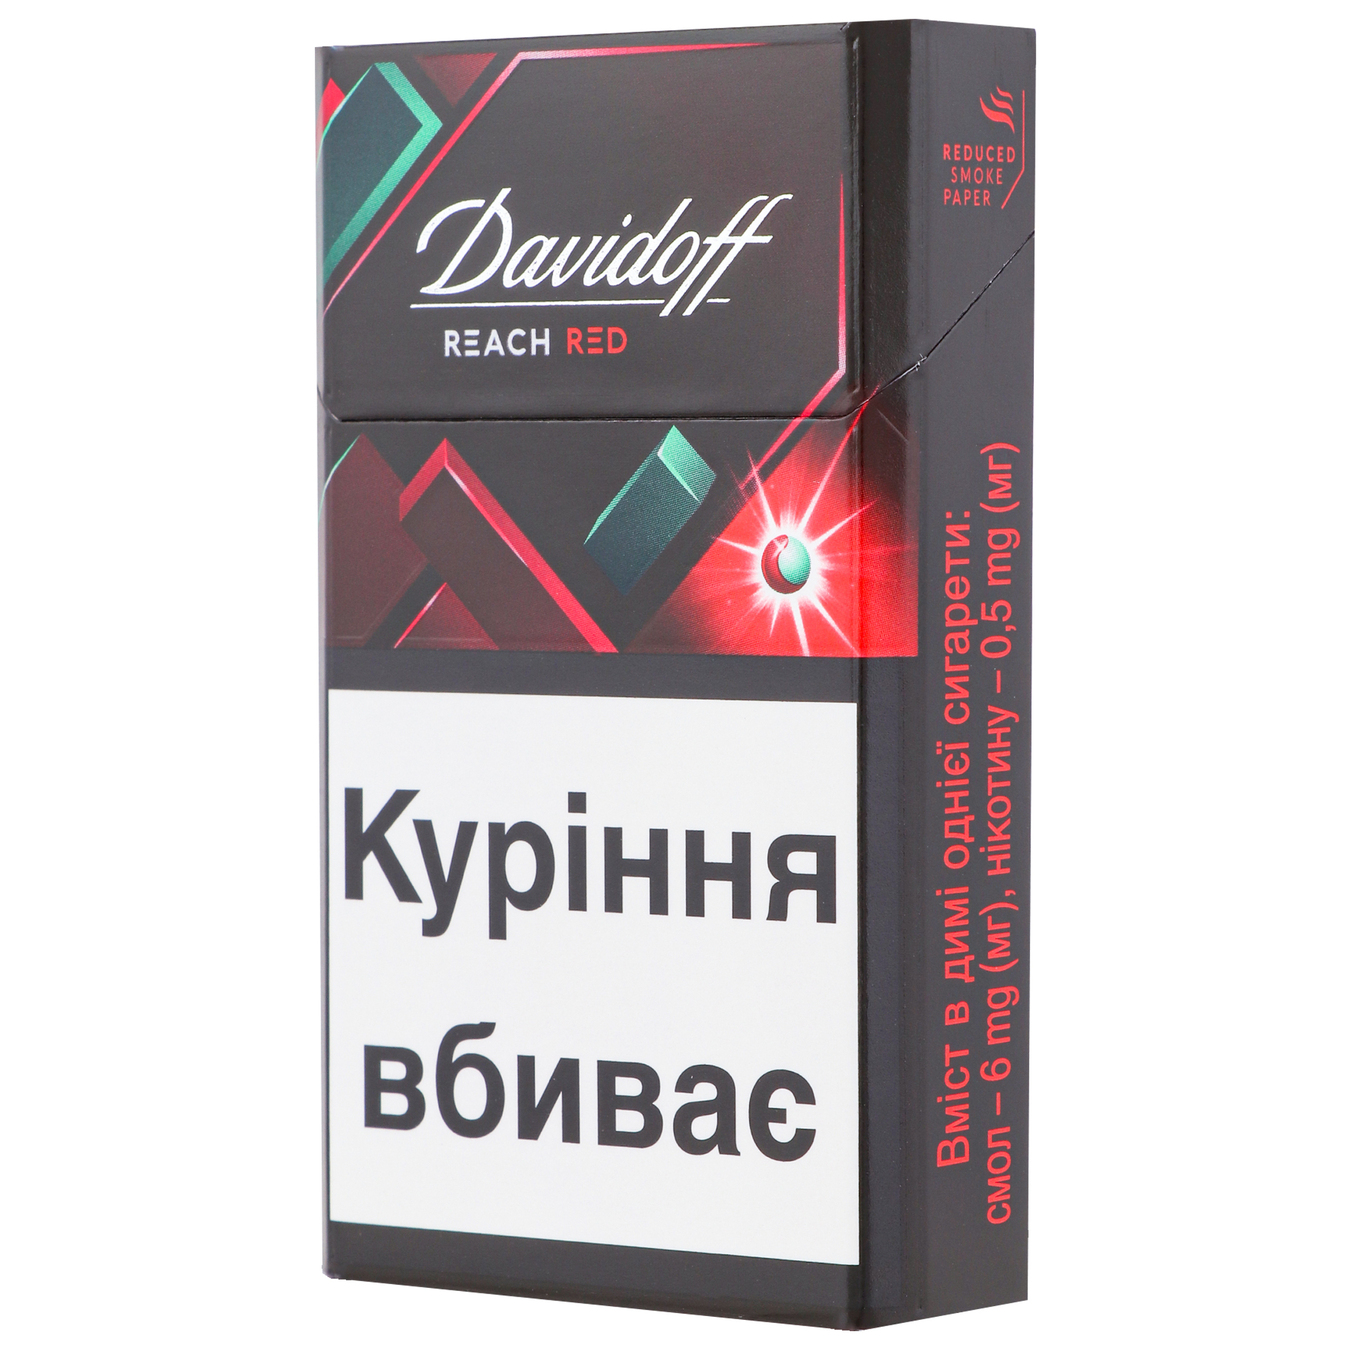 Davidoff Reach Red Fusion 20 cigarettes (the price is without excise tax) 2